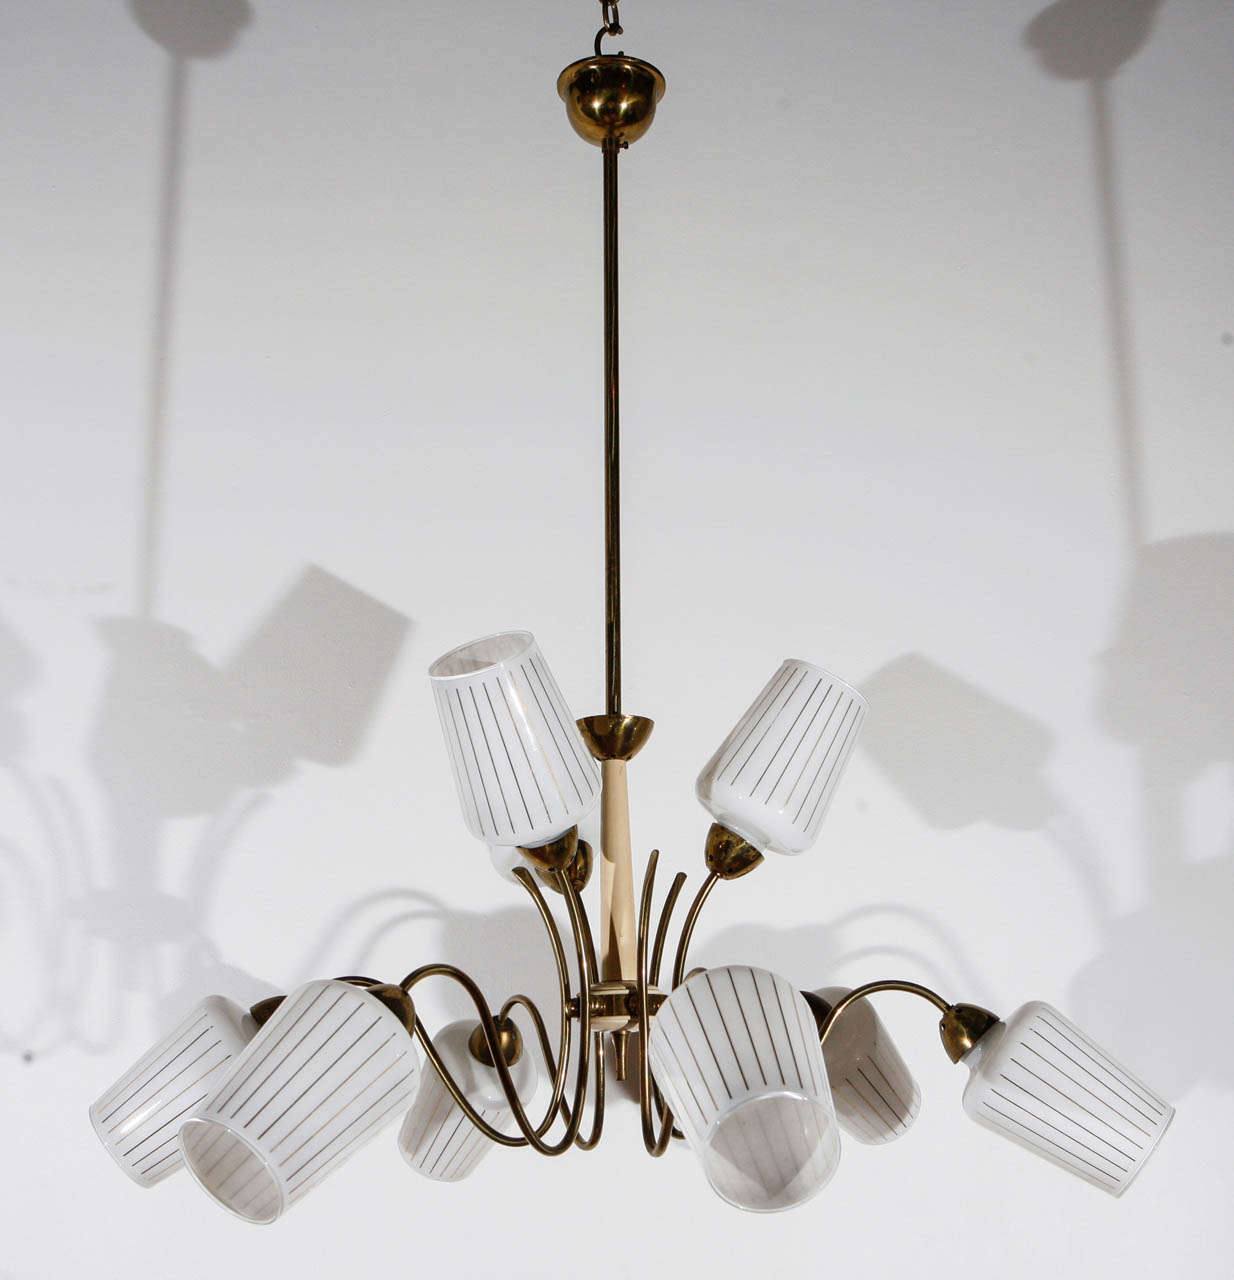 Mid-Century fixture; newly rewired with nine candelabra sockets.